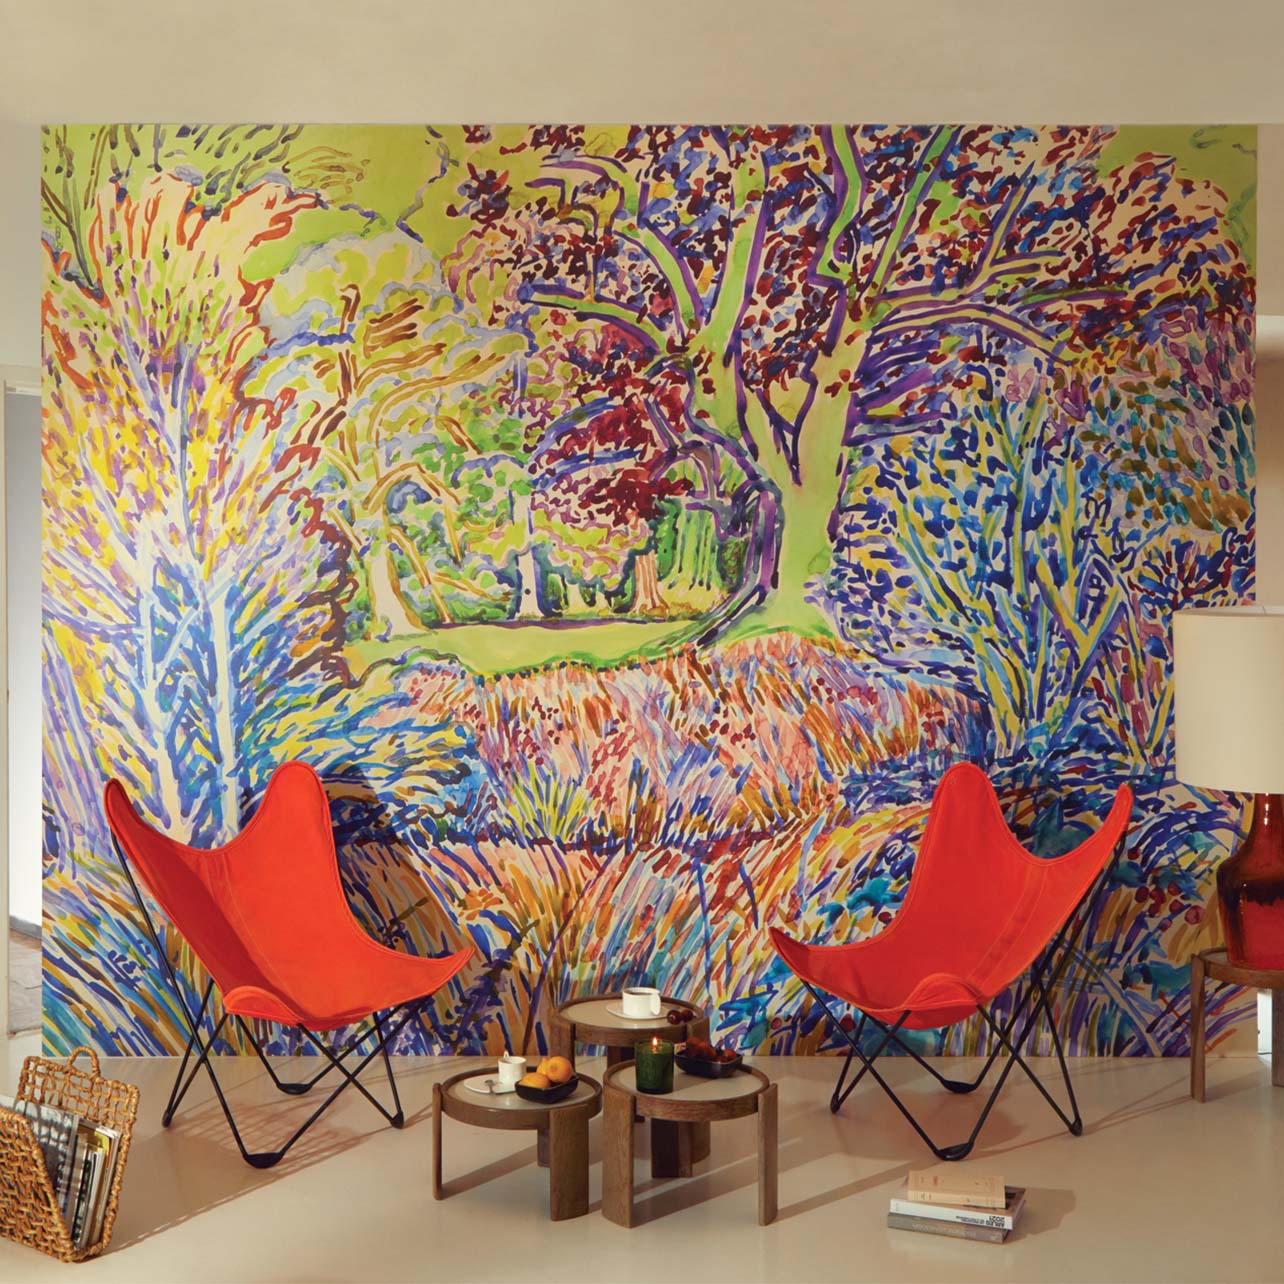 Diptyque colorful wallpaper showcased in a room with red chairs and a coffee table